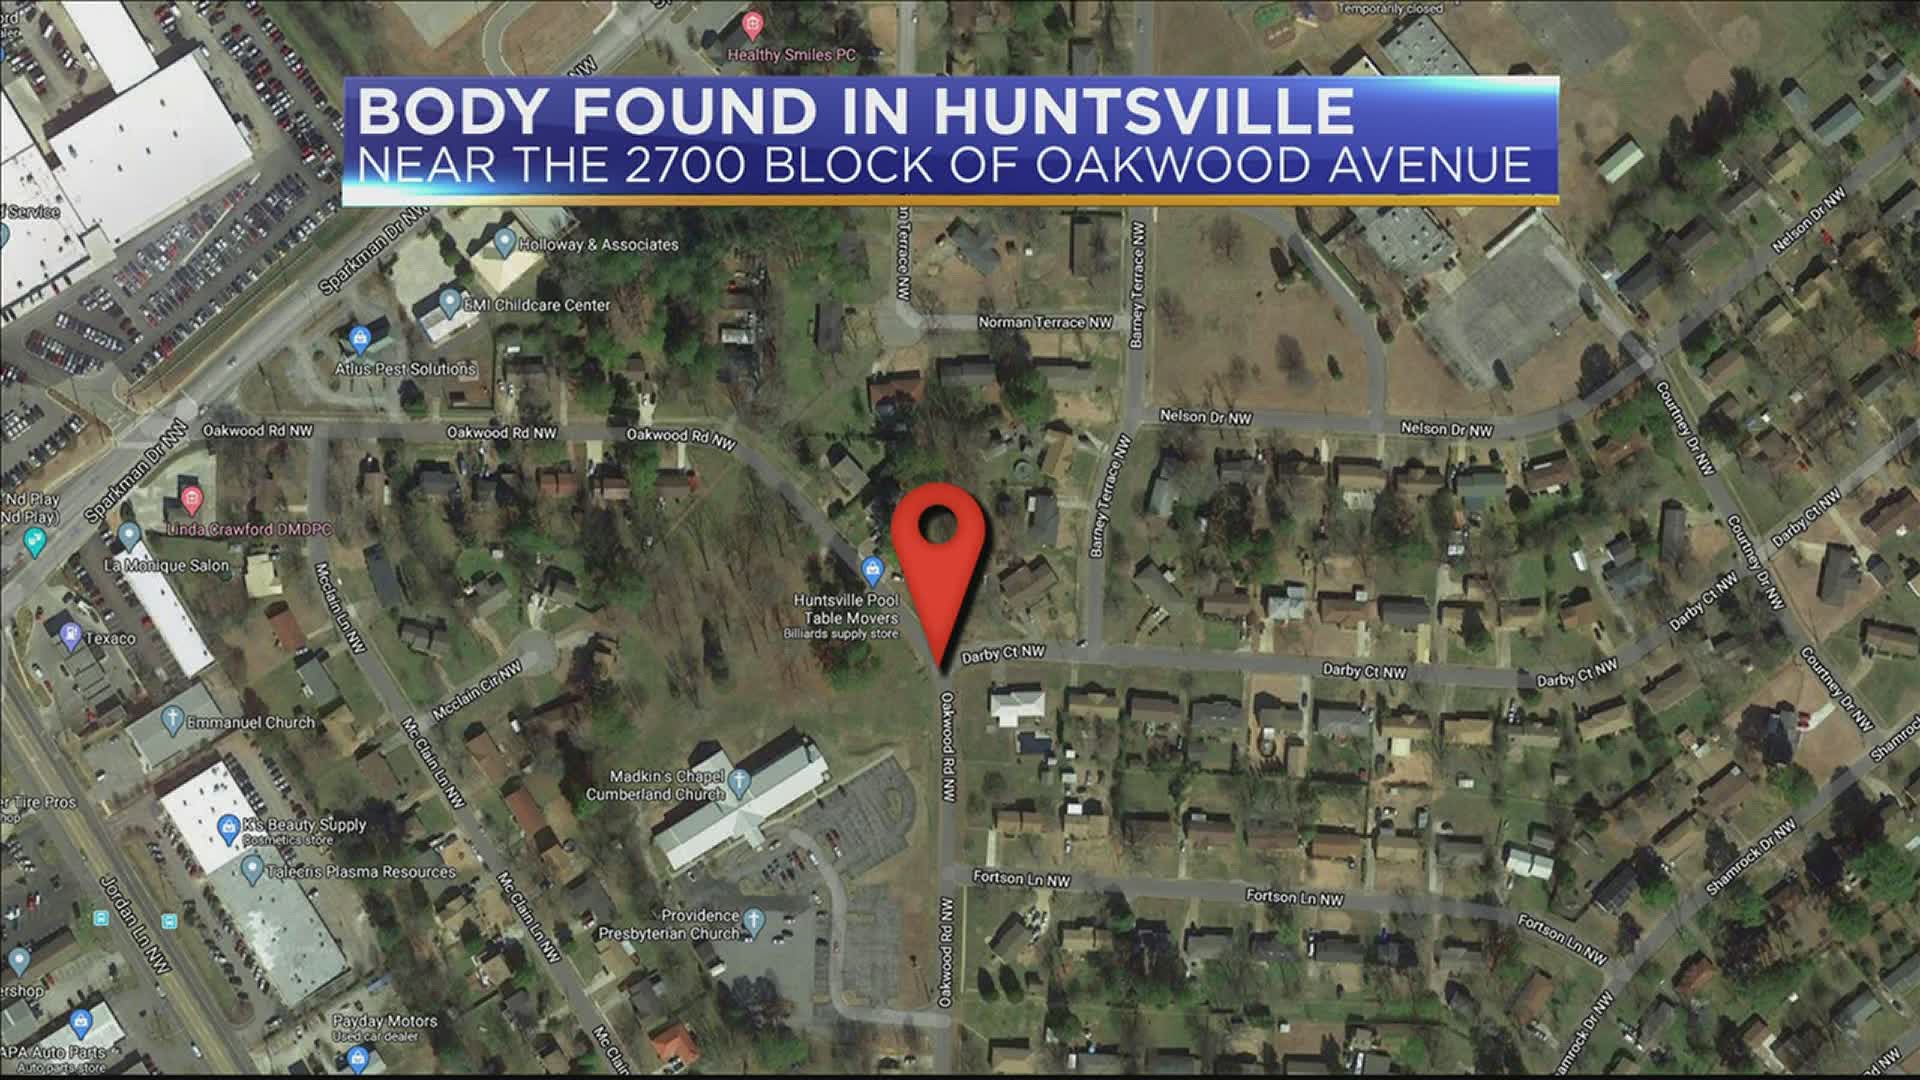 A homicide investigation underway after a male, age 20 to 30, was found at an open area on Oakwood Road.